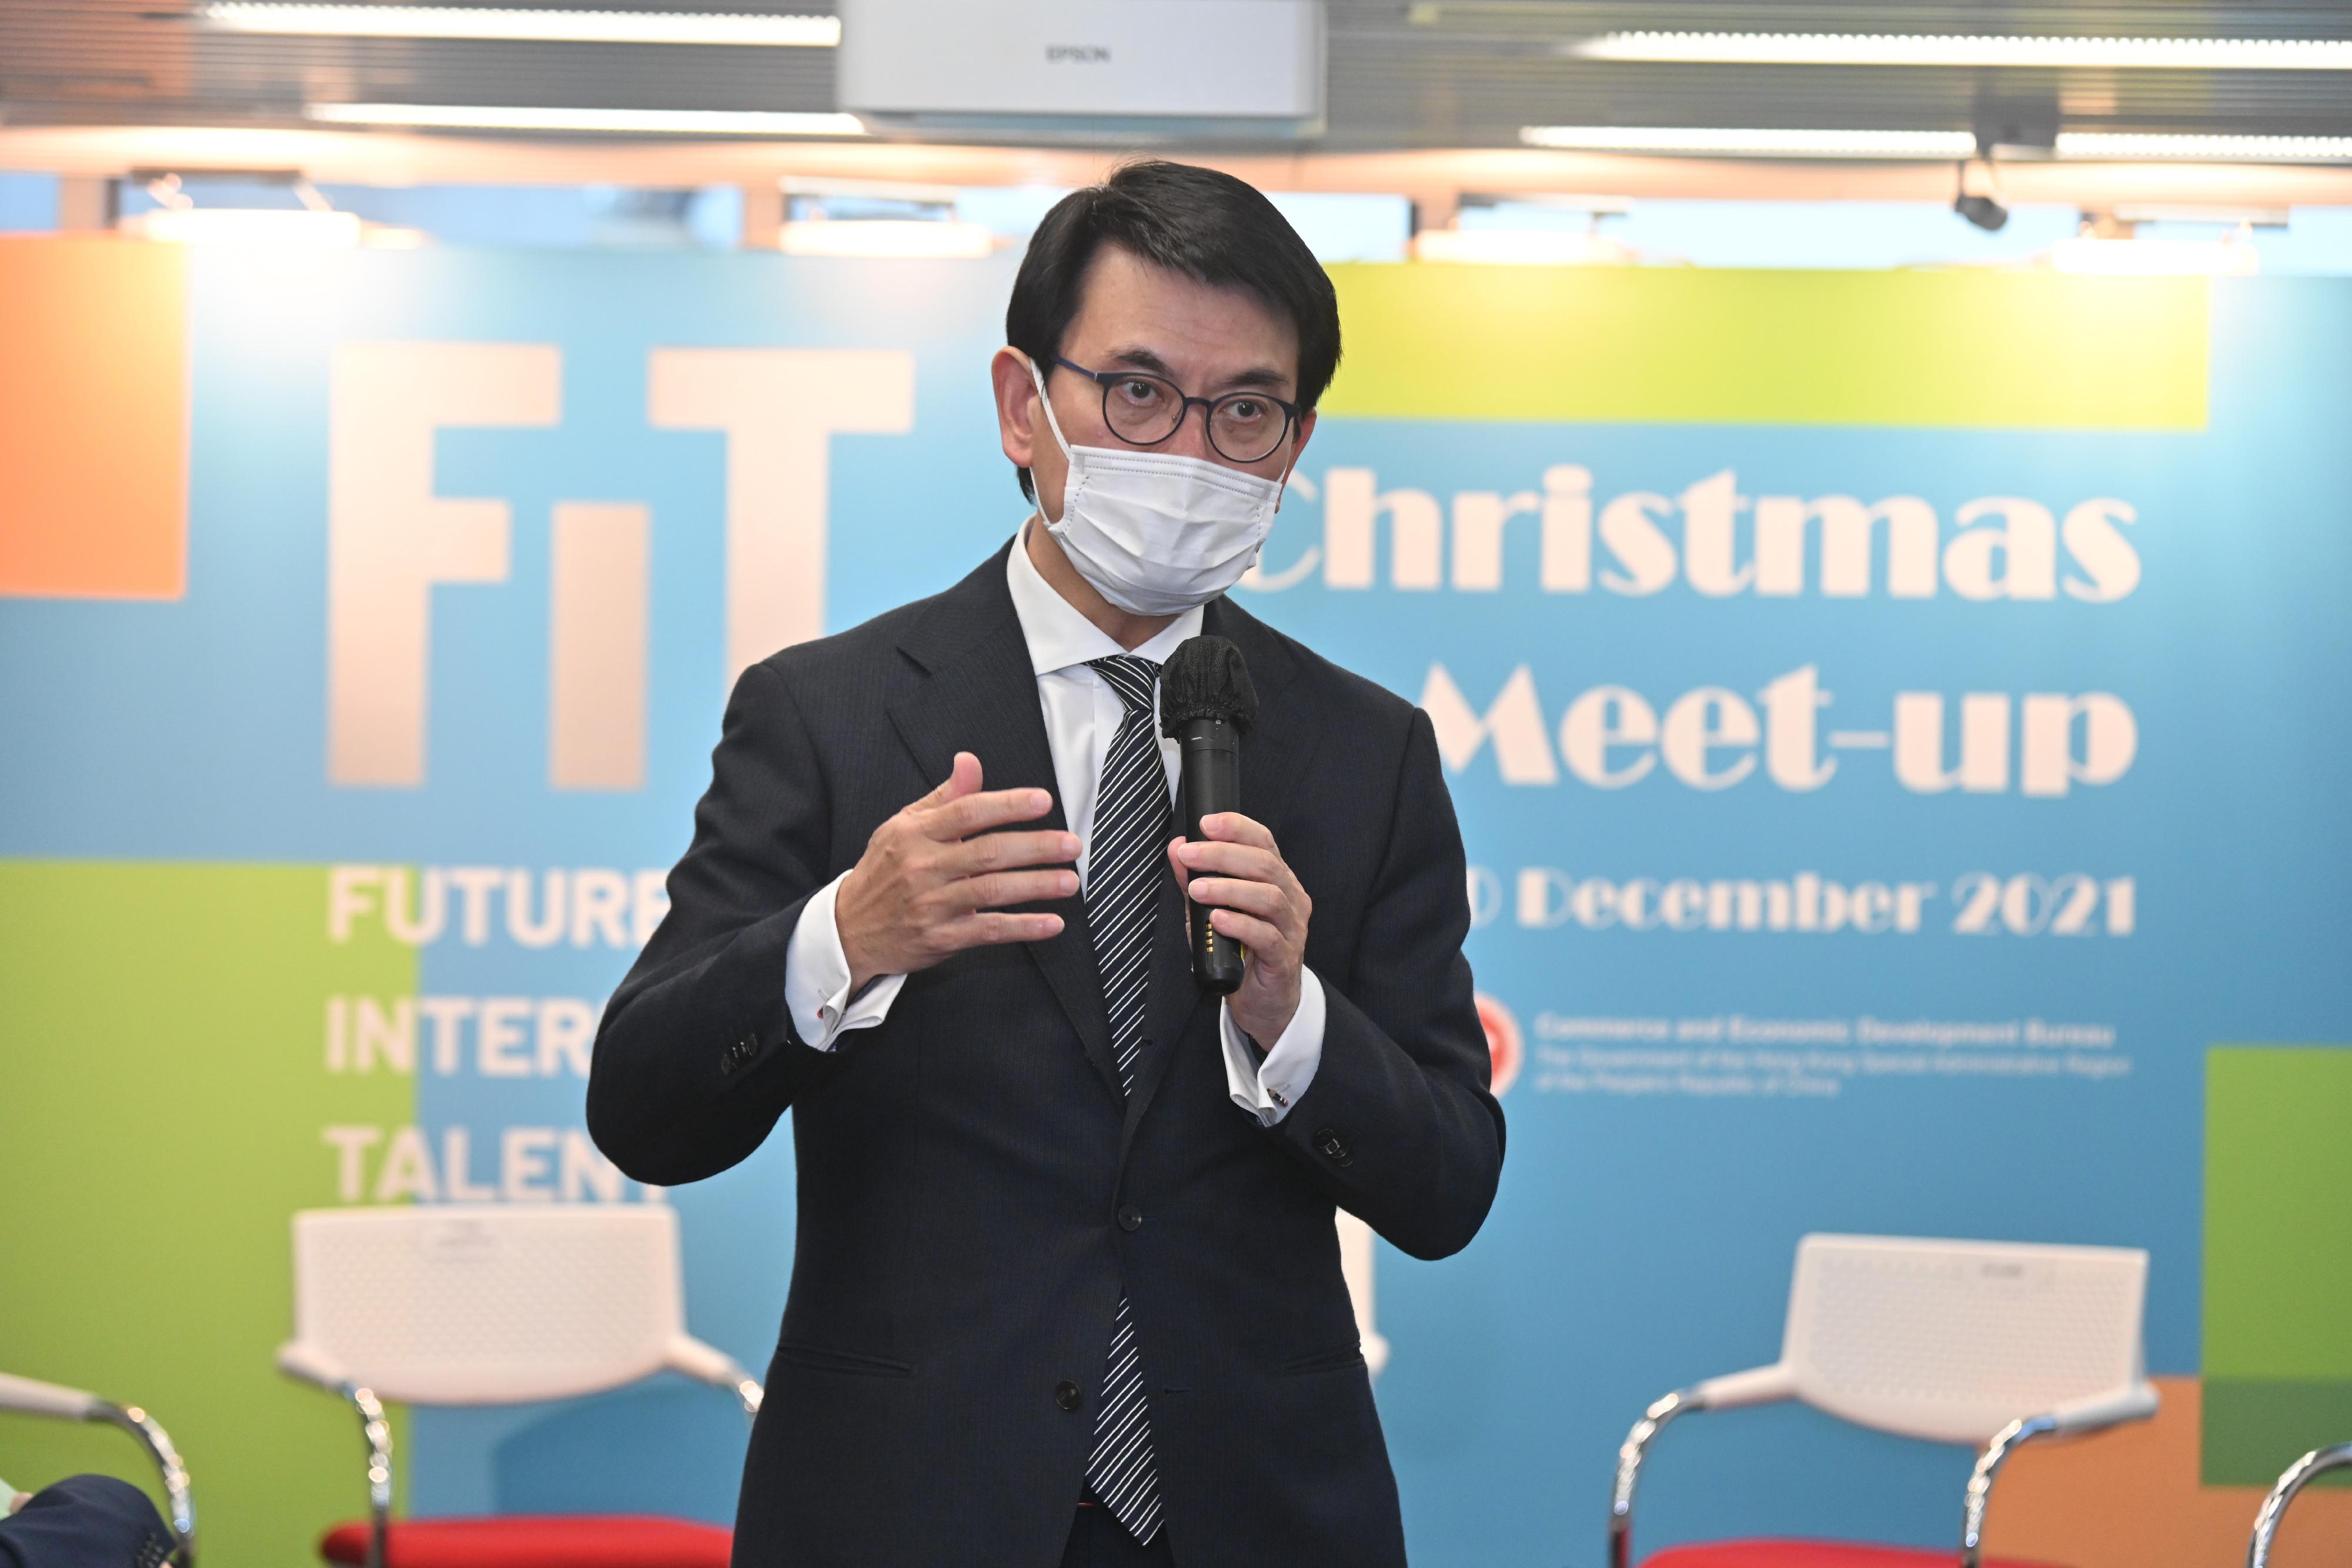 The Secretary for Commerce and Economic Development, Mr Edward Yau, met the participating companies and employees of the Future International Talent programme today (December 10). Photo shows Mr Yau speaking at the meeting.